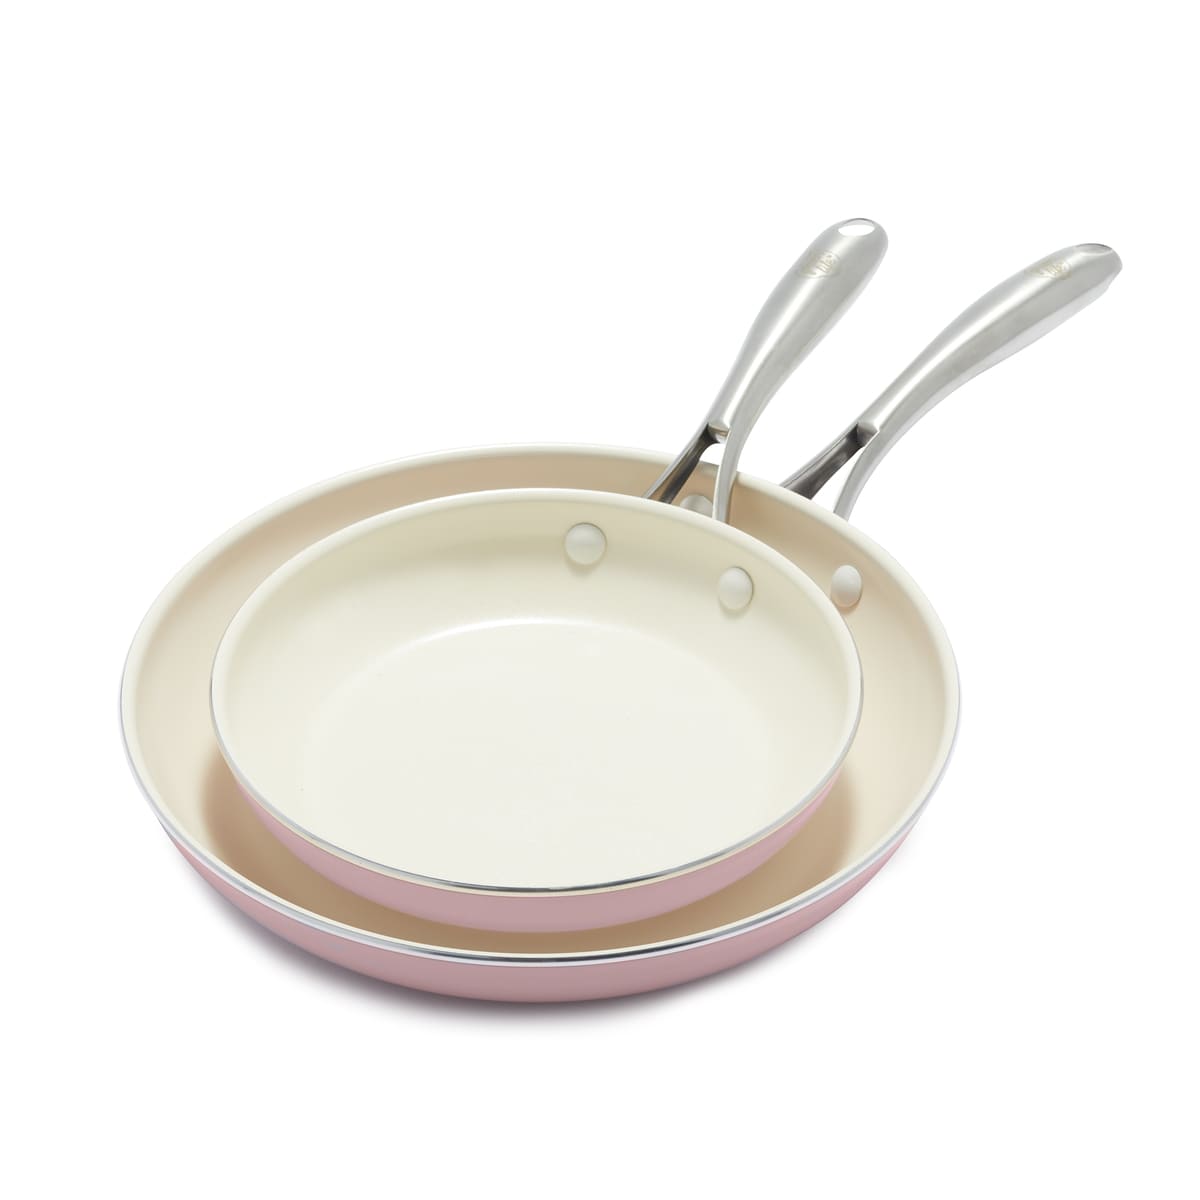 CC004711-001 - Porpoise GREENLIFE ARTISAN 12PC COOKWARE SETS, PINK - Product Image 4